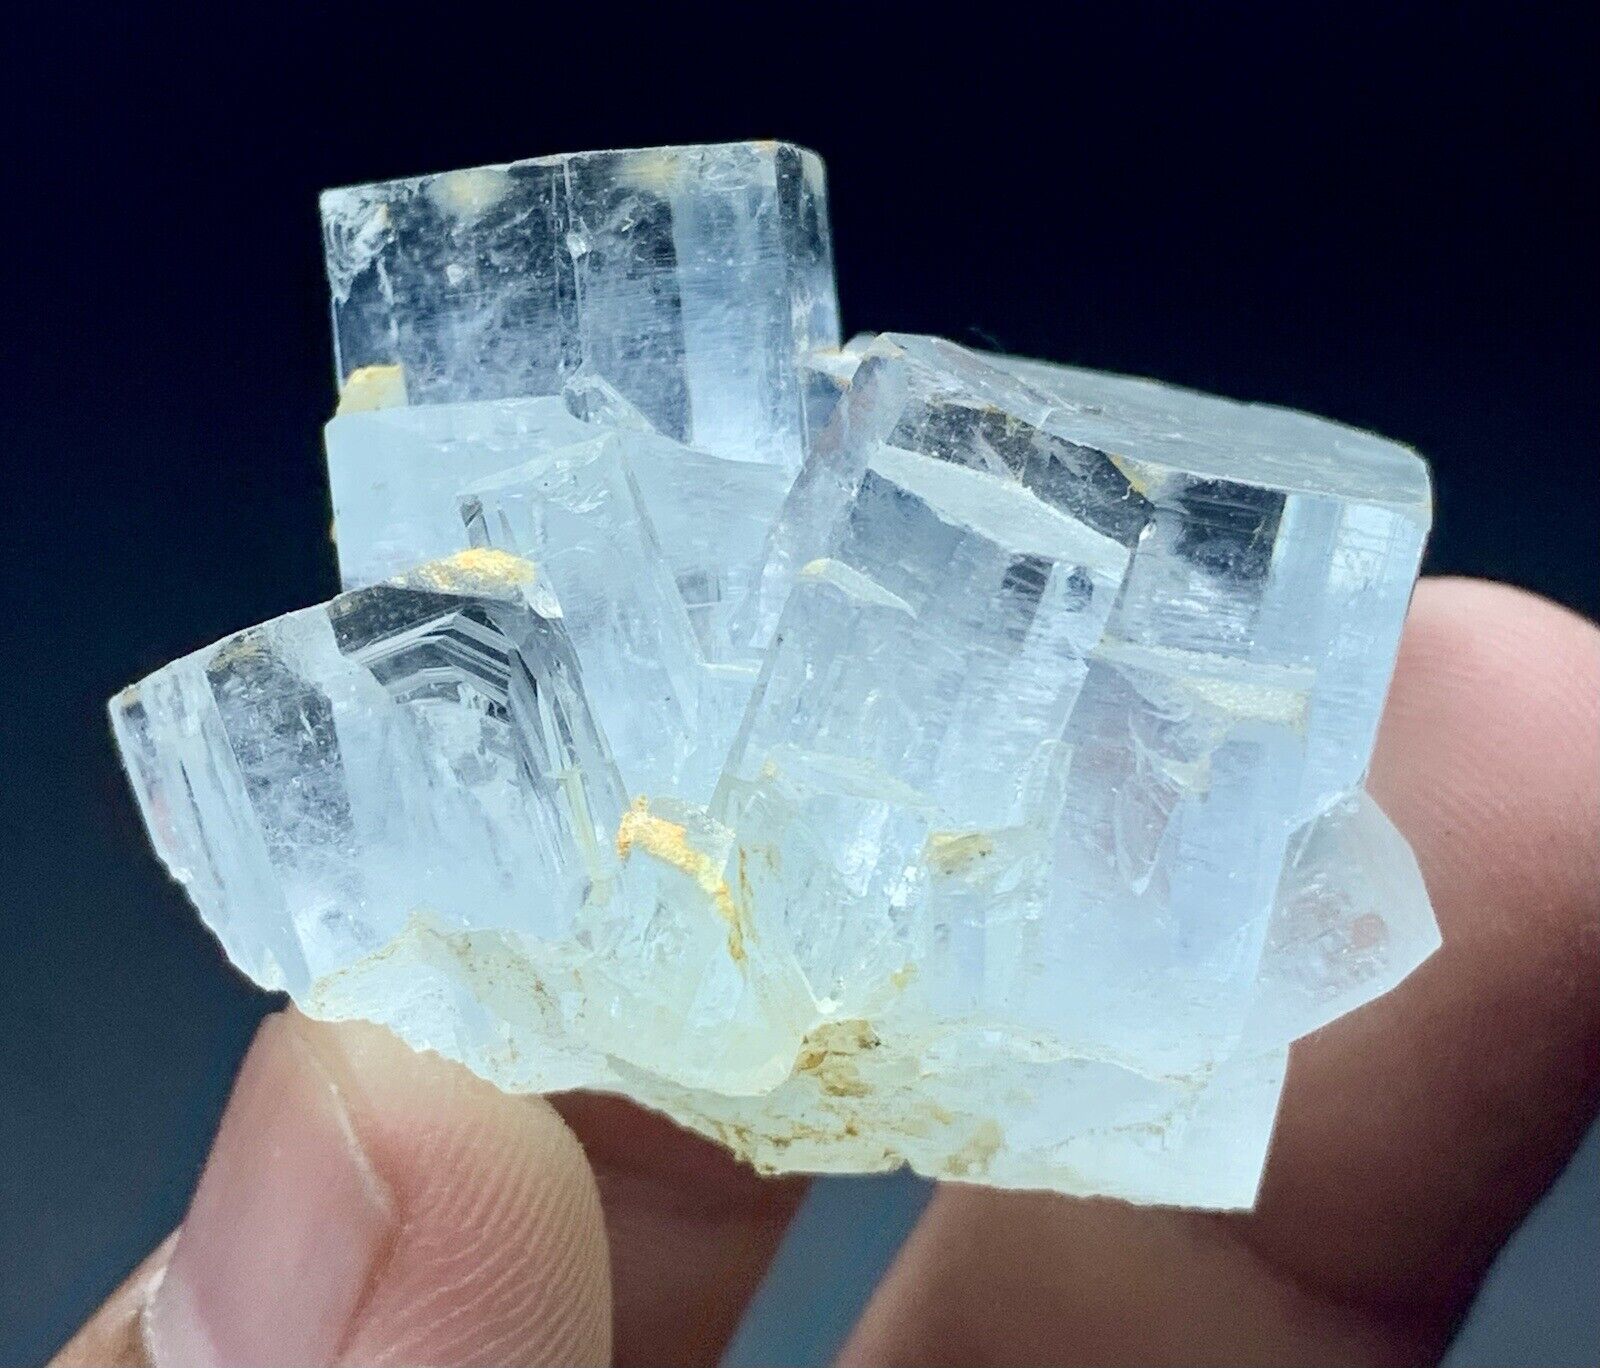 226 Cts Aquamarine Crystal with mica From Skardu Pakistan